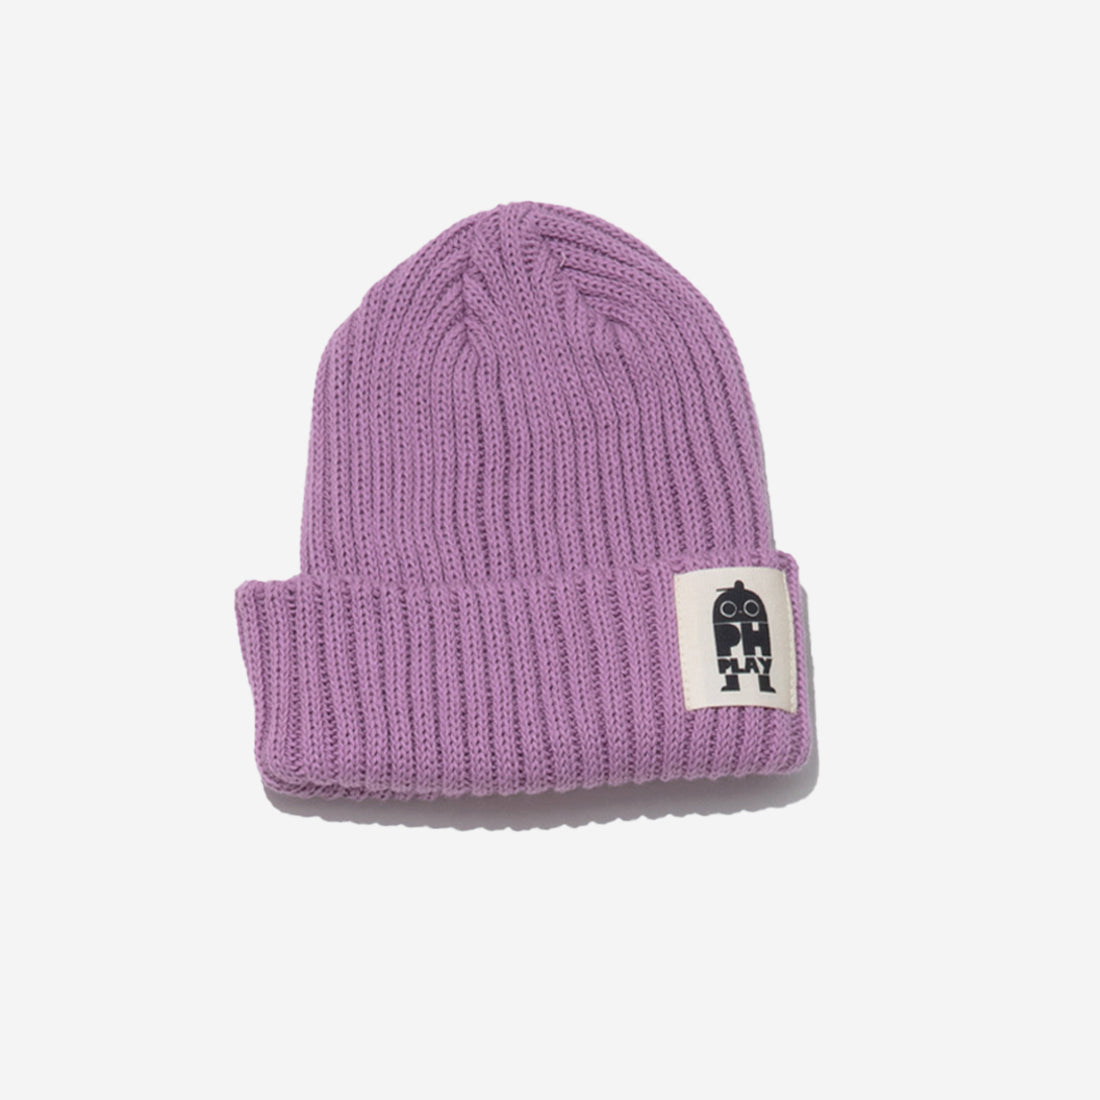 knitted purple hat with black ph play logo on white background